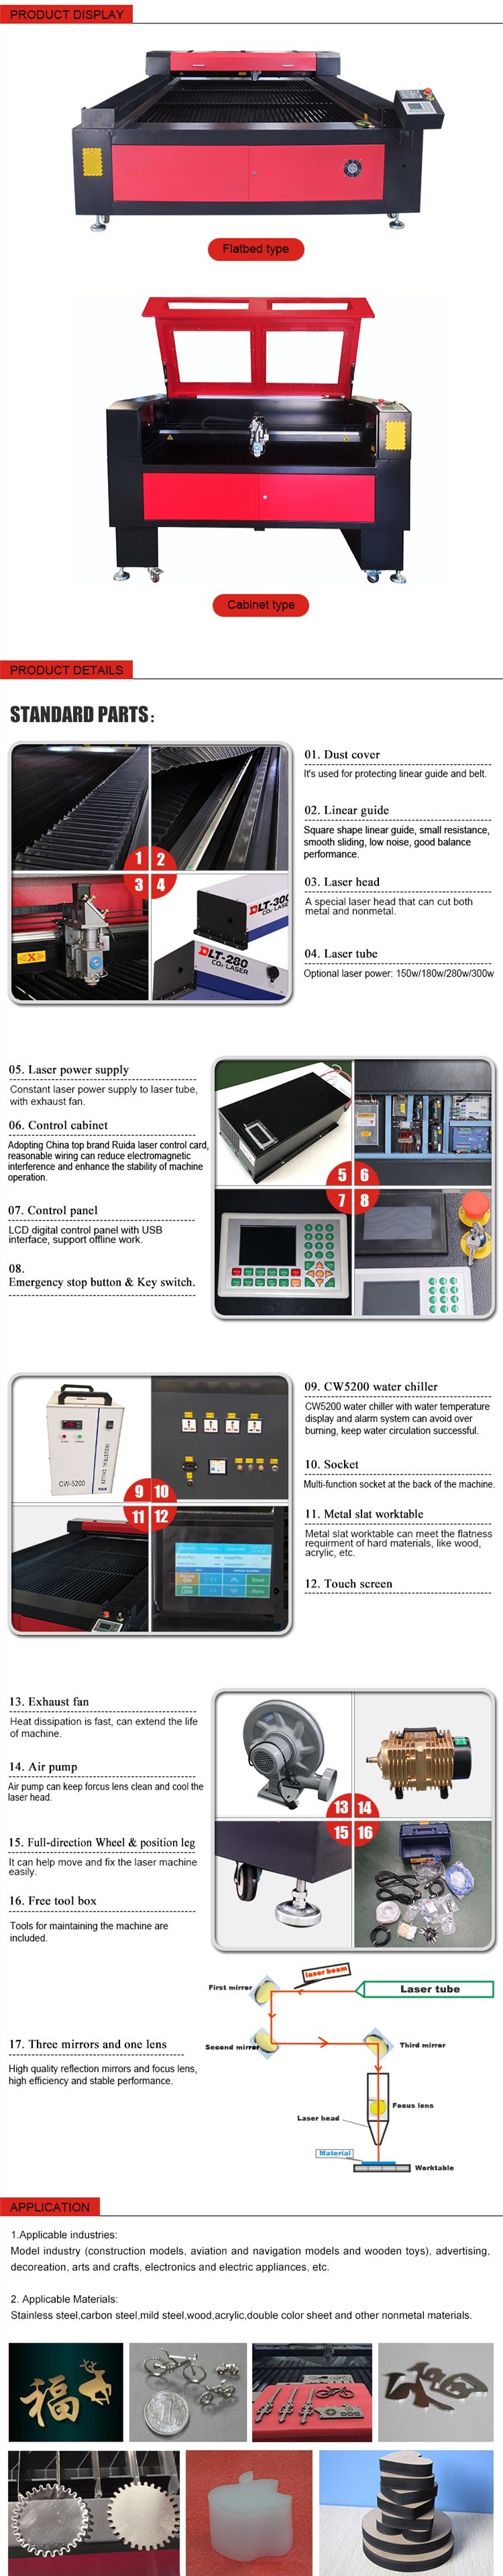 Hot Sale Metal CO2 Laser Cutting Machine for Stainless Steel